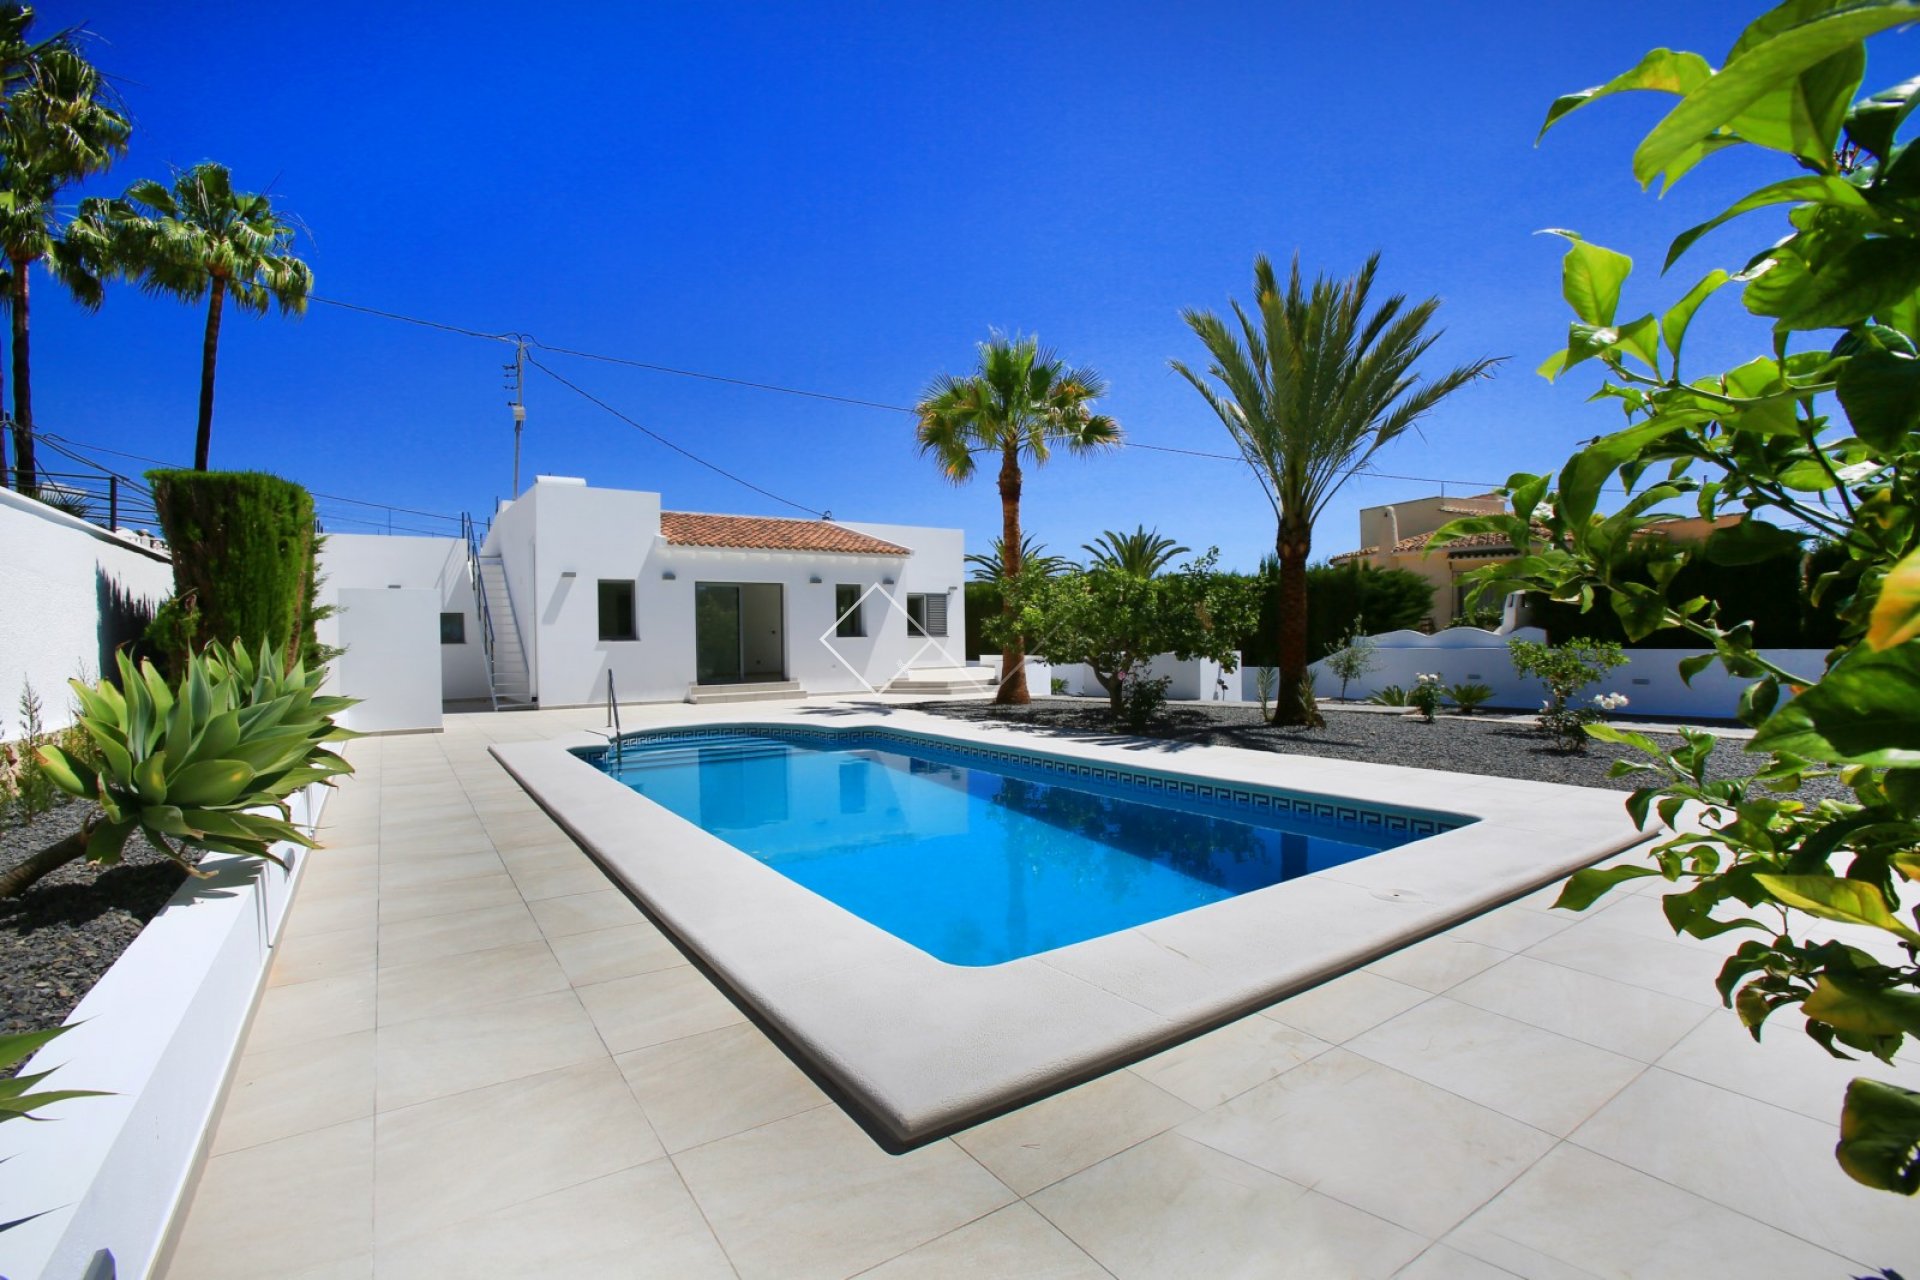 Renovated villa for sale in Benissa, 200m from the beach